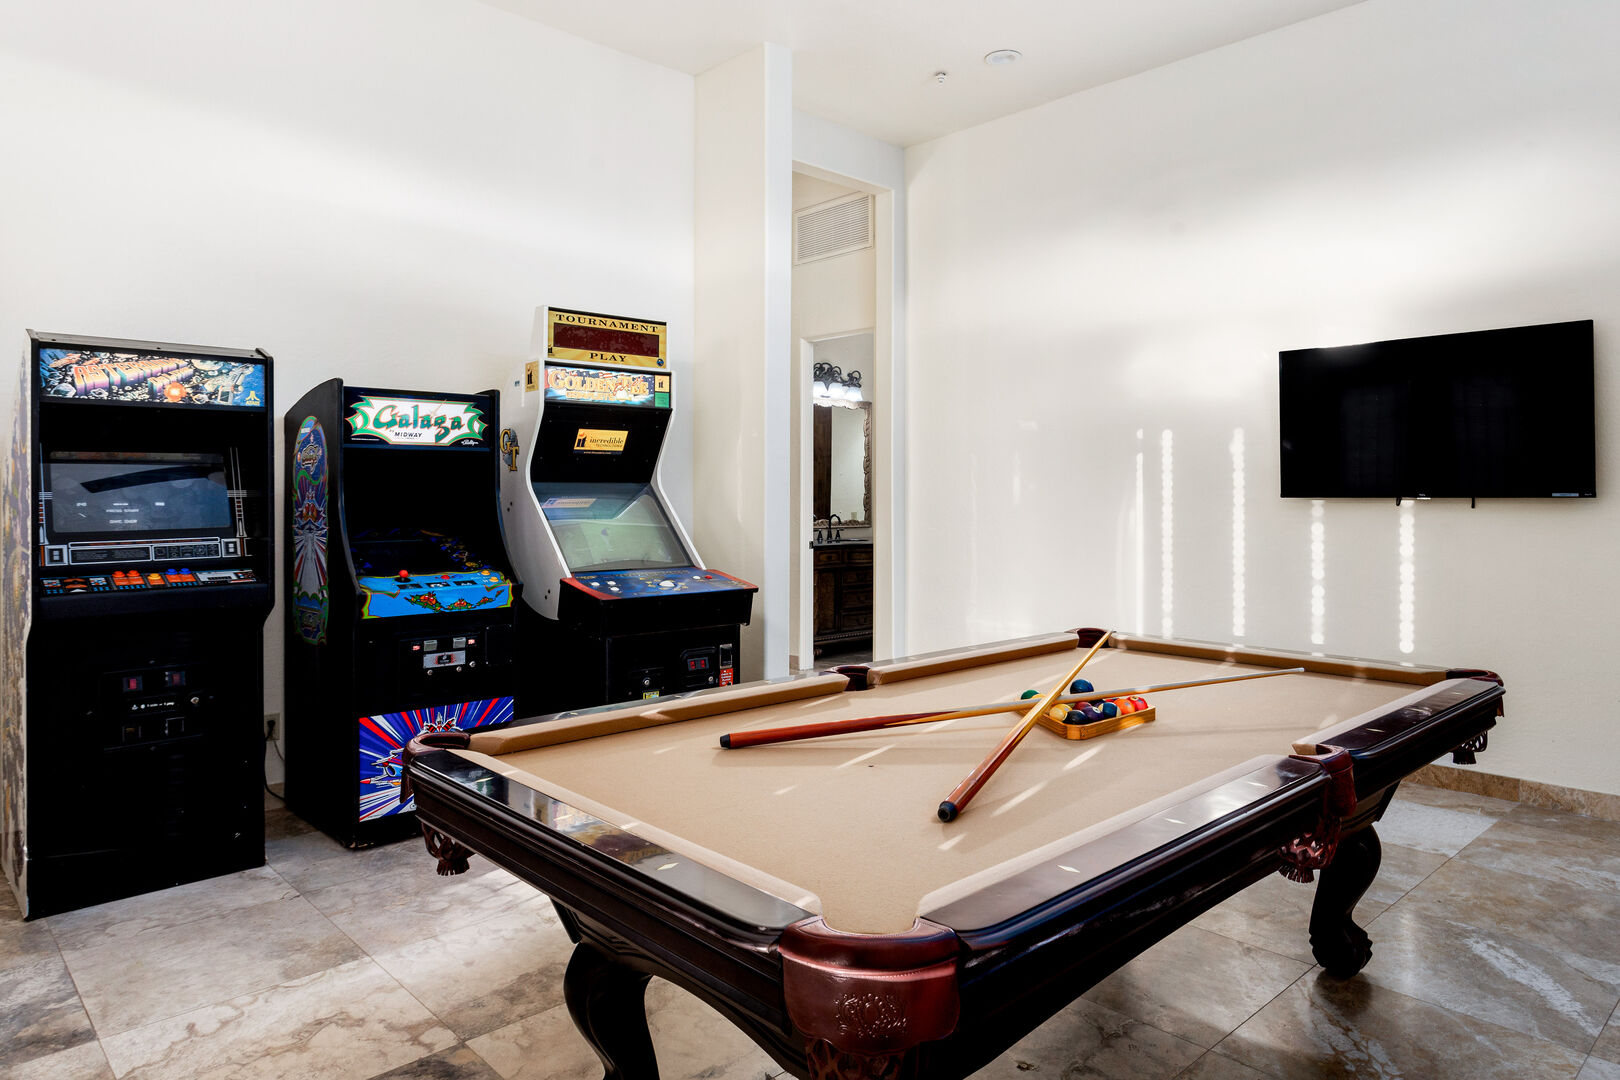 Rec Room w/ Pool Table, TV and Arcade Games